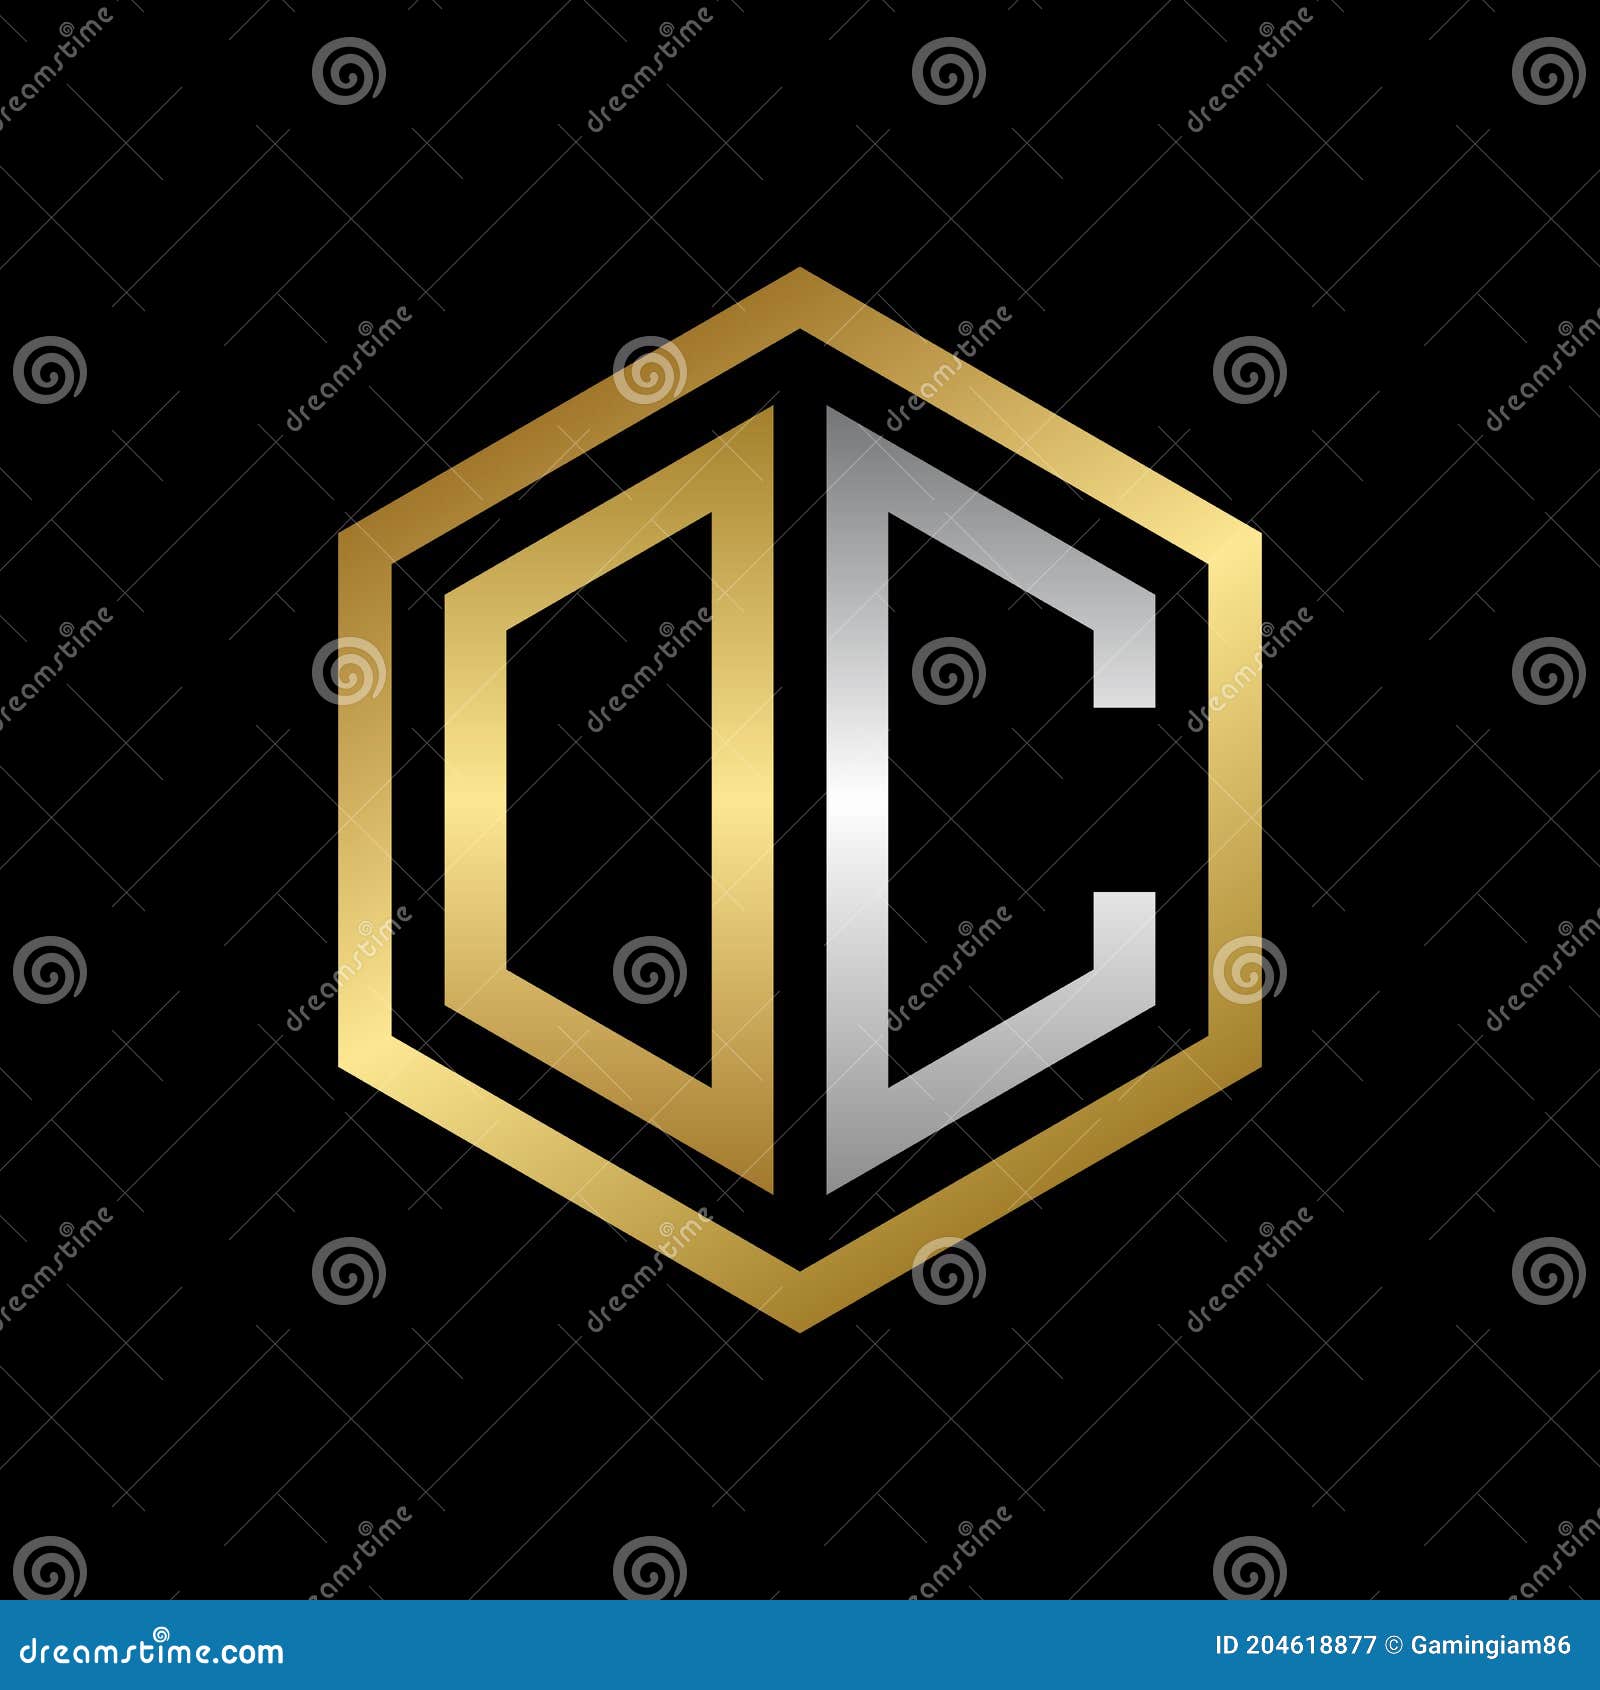  graphic initials letter dc or oc logo  template